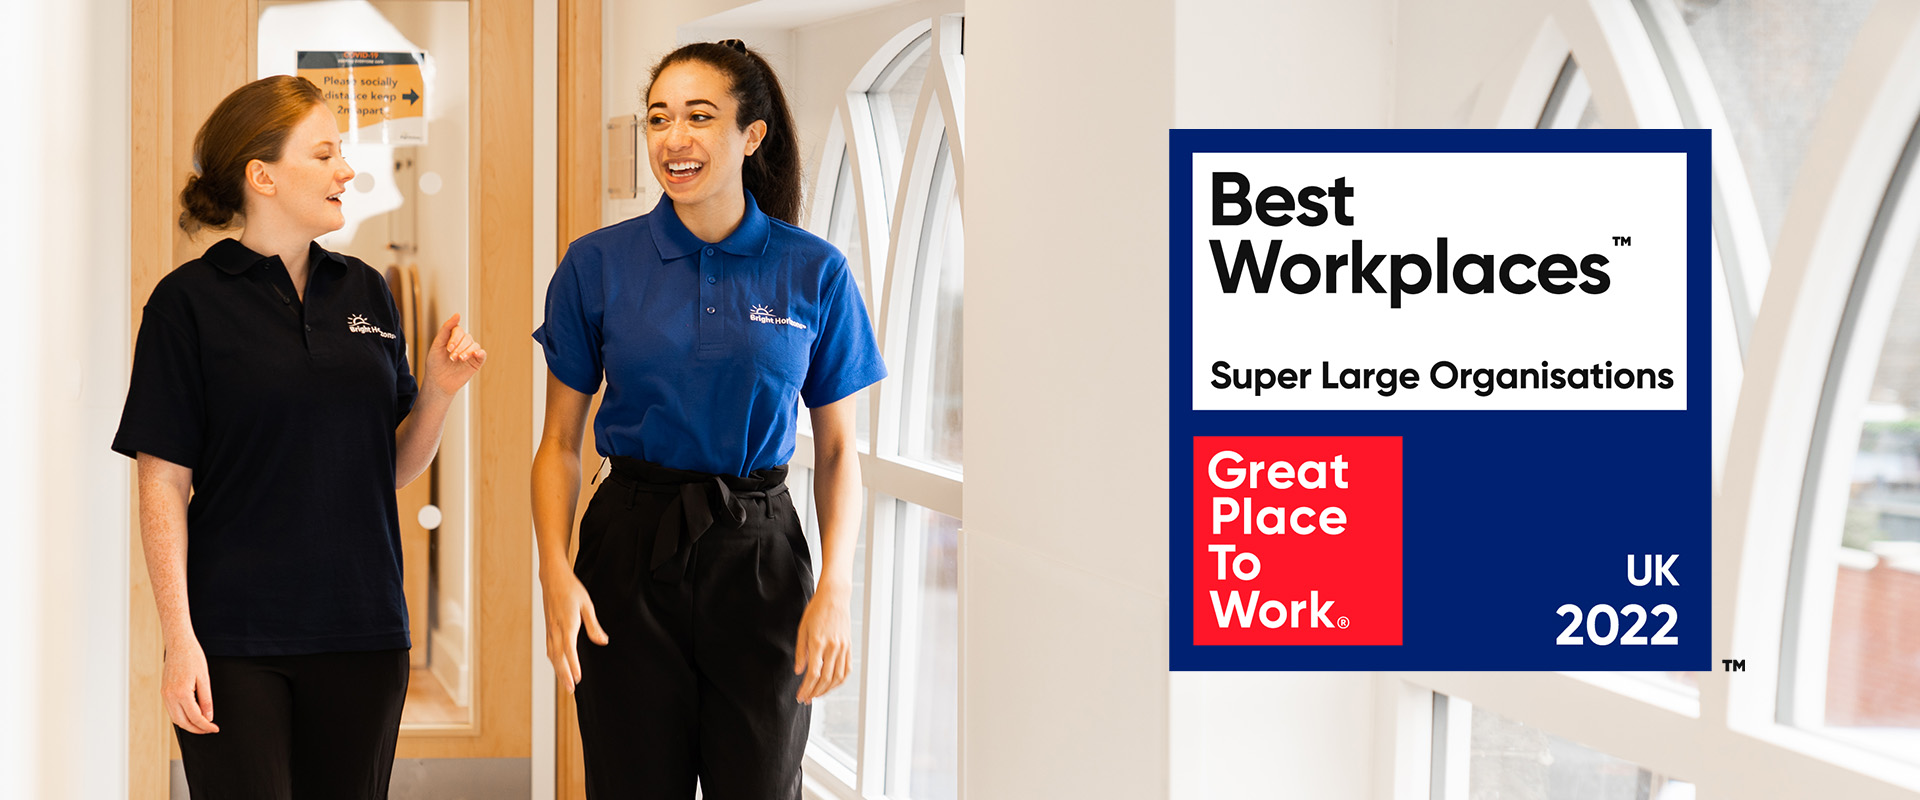 Bright Horizons awarded UK’s Best Workplaces™ recognition!